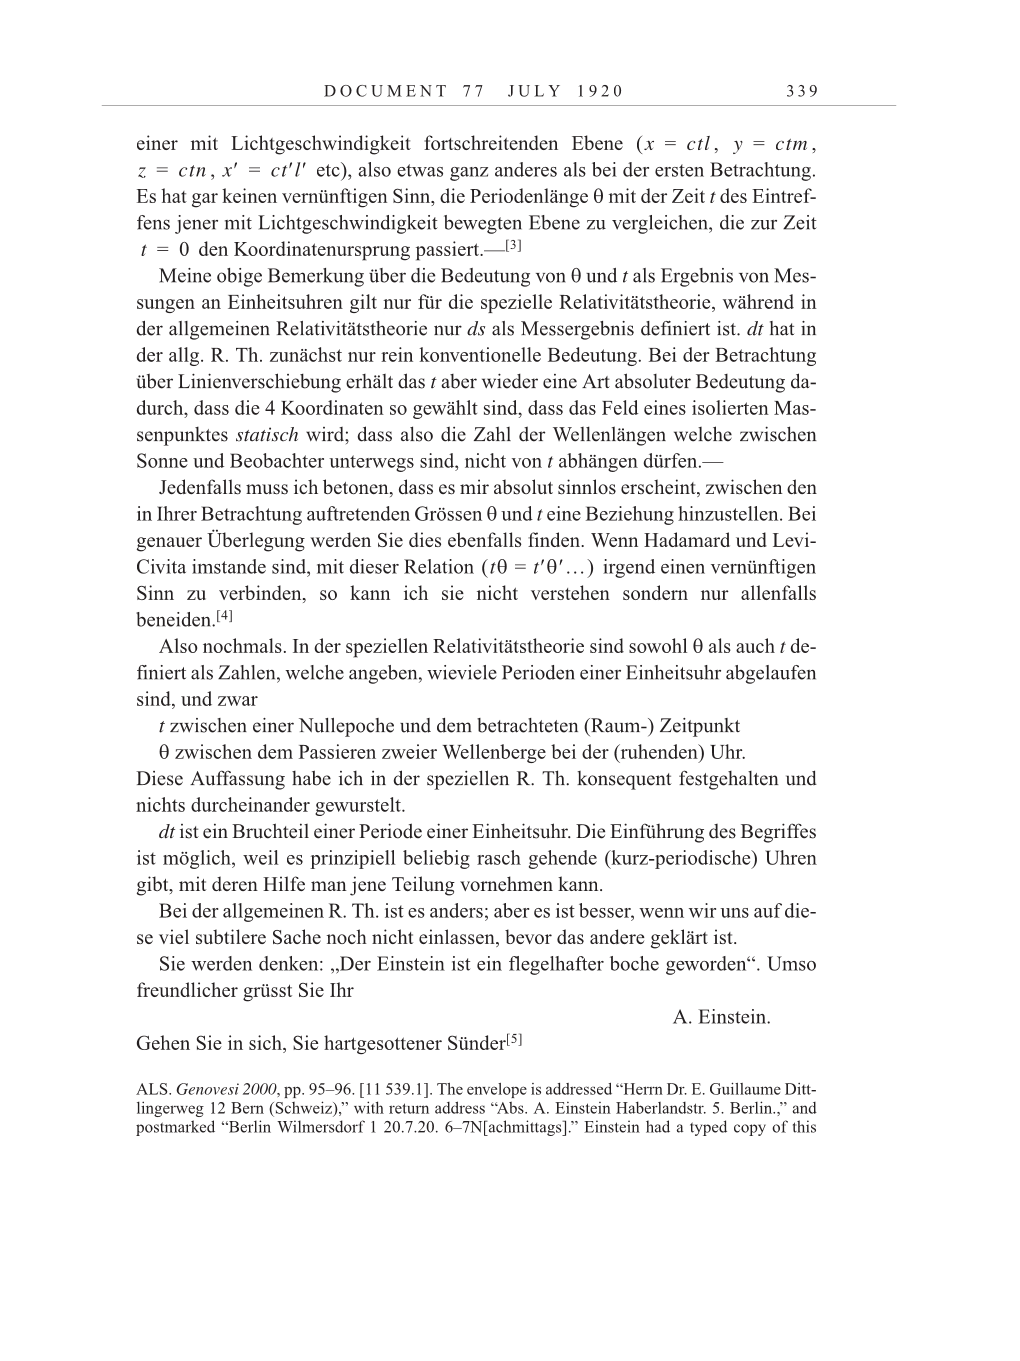 Volume 10: The Berlin Years: Correspondence May-December 1920 / Supplementary Correspondence 1909-1920 page 339